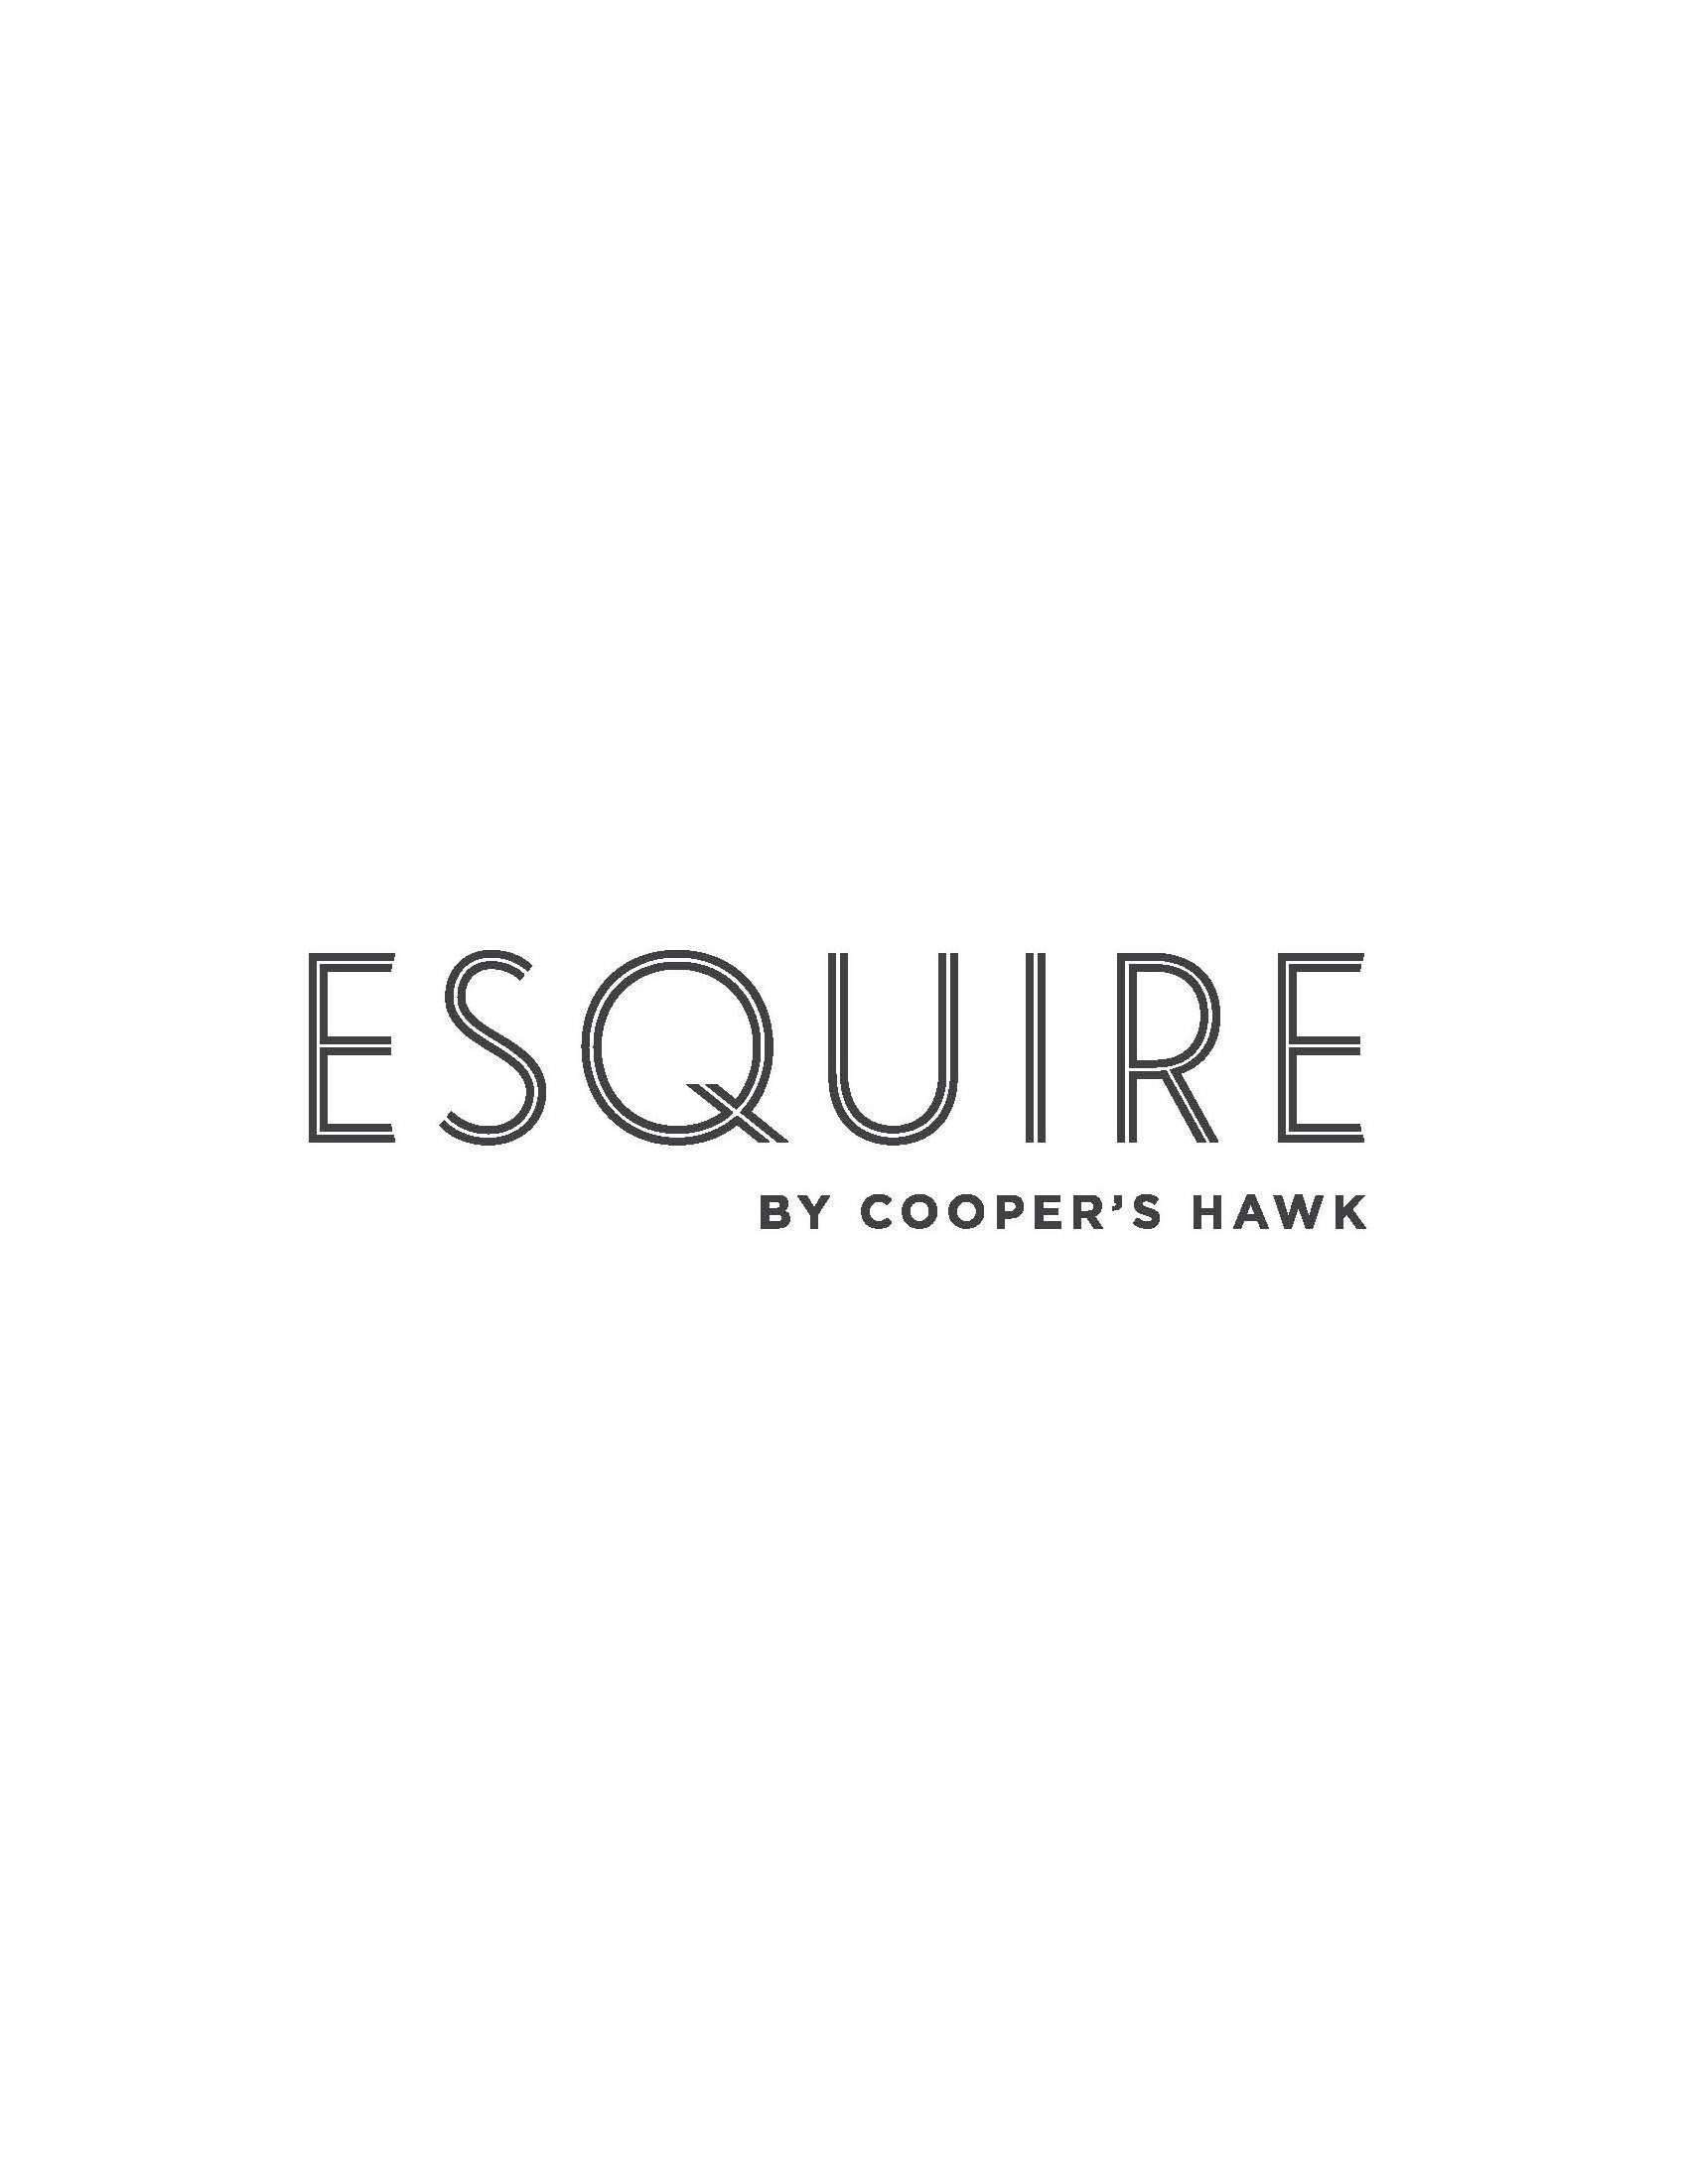  ESQUIRE BY COOPER'S HAWK